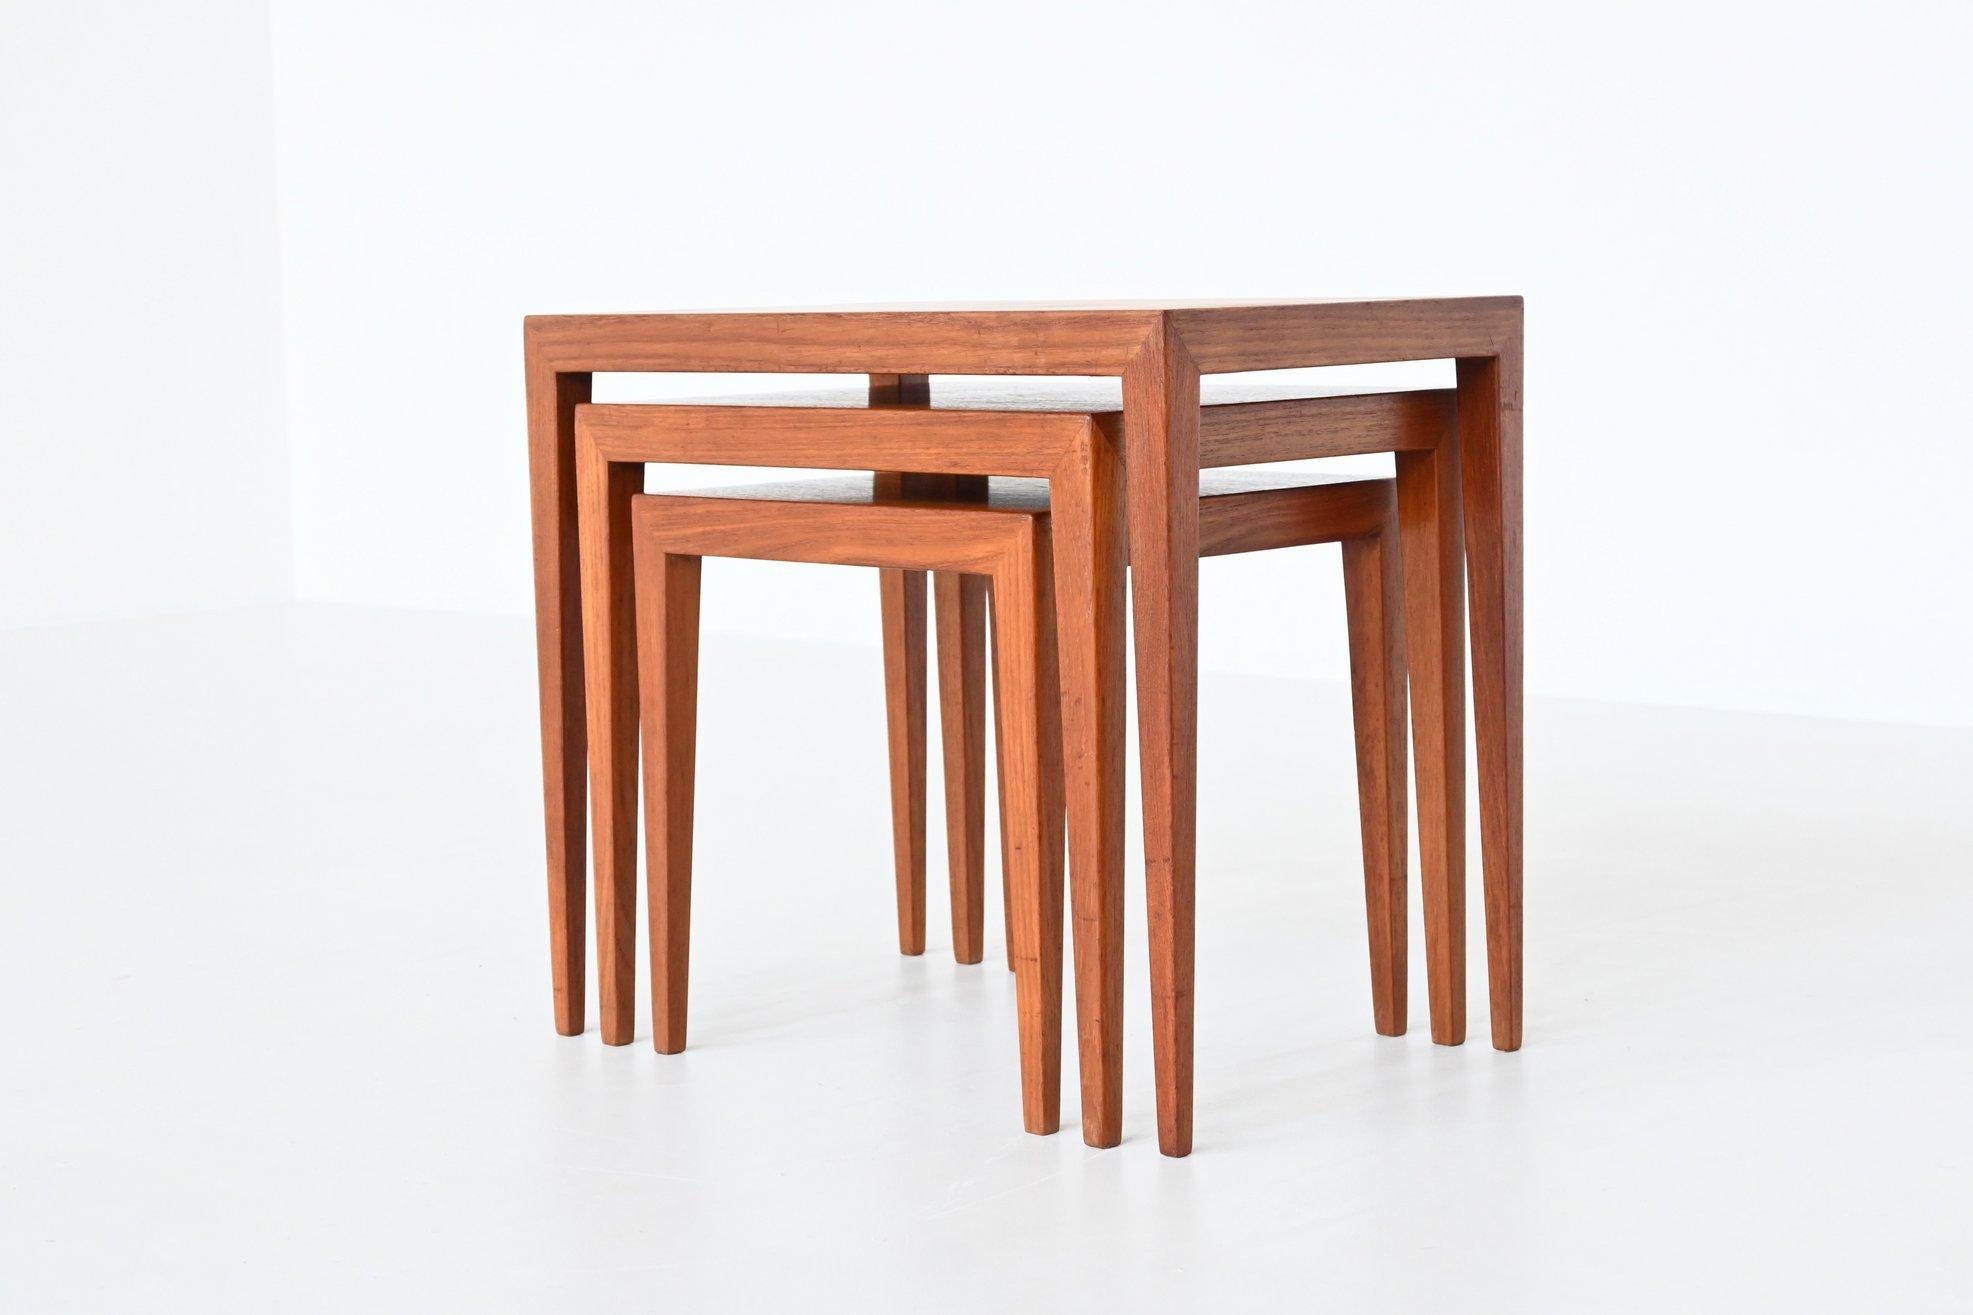 Beautiful shaped set of three nesting tables model 163 designed by Severin Hansen Jr. for Haslev Møbelsnedskeri, Denmark 1960. This sophisticated set of nesting tables is made of nice grained teak veneer. They give a minimalist look due to the